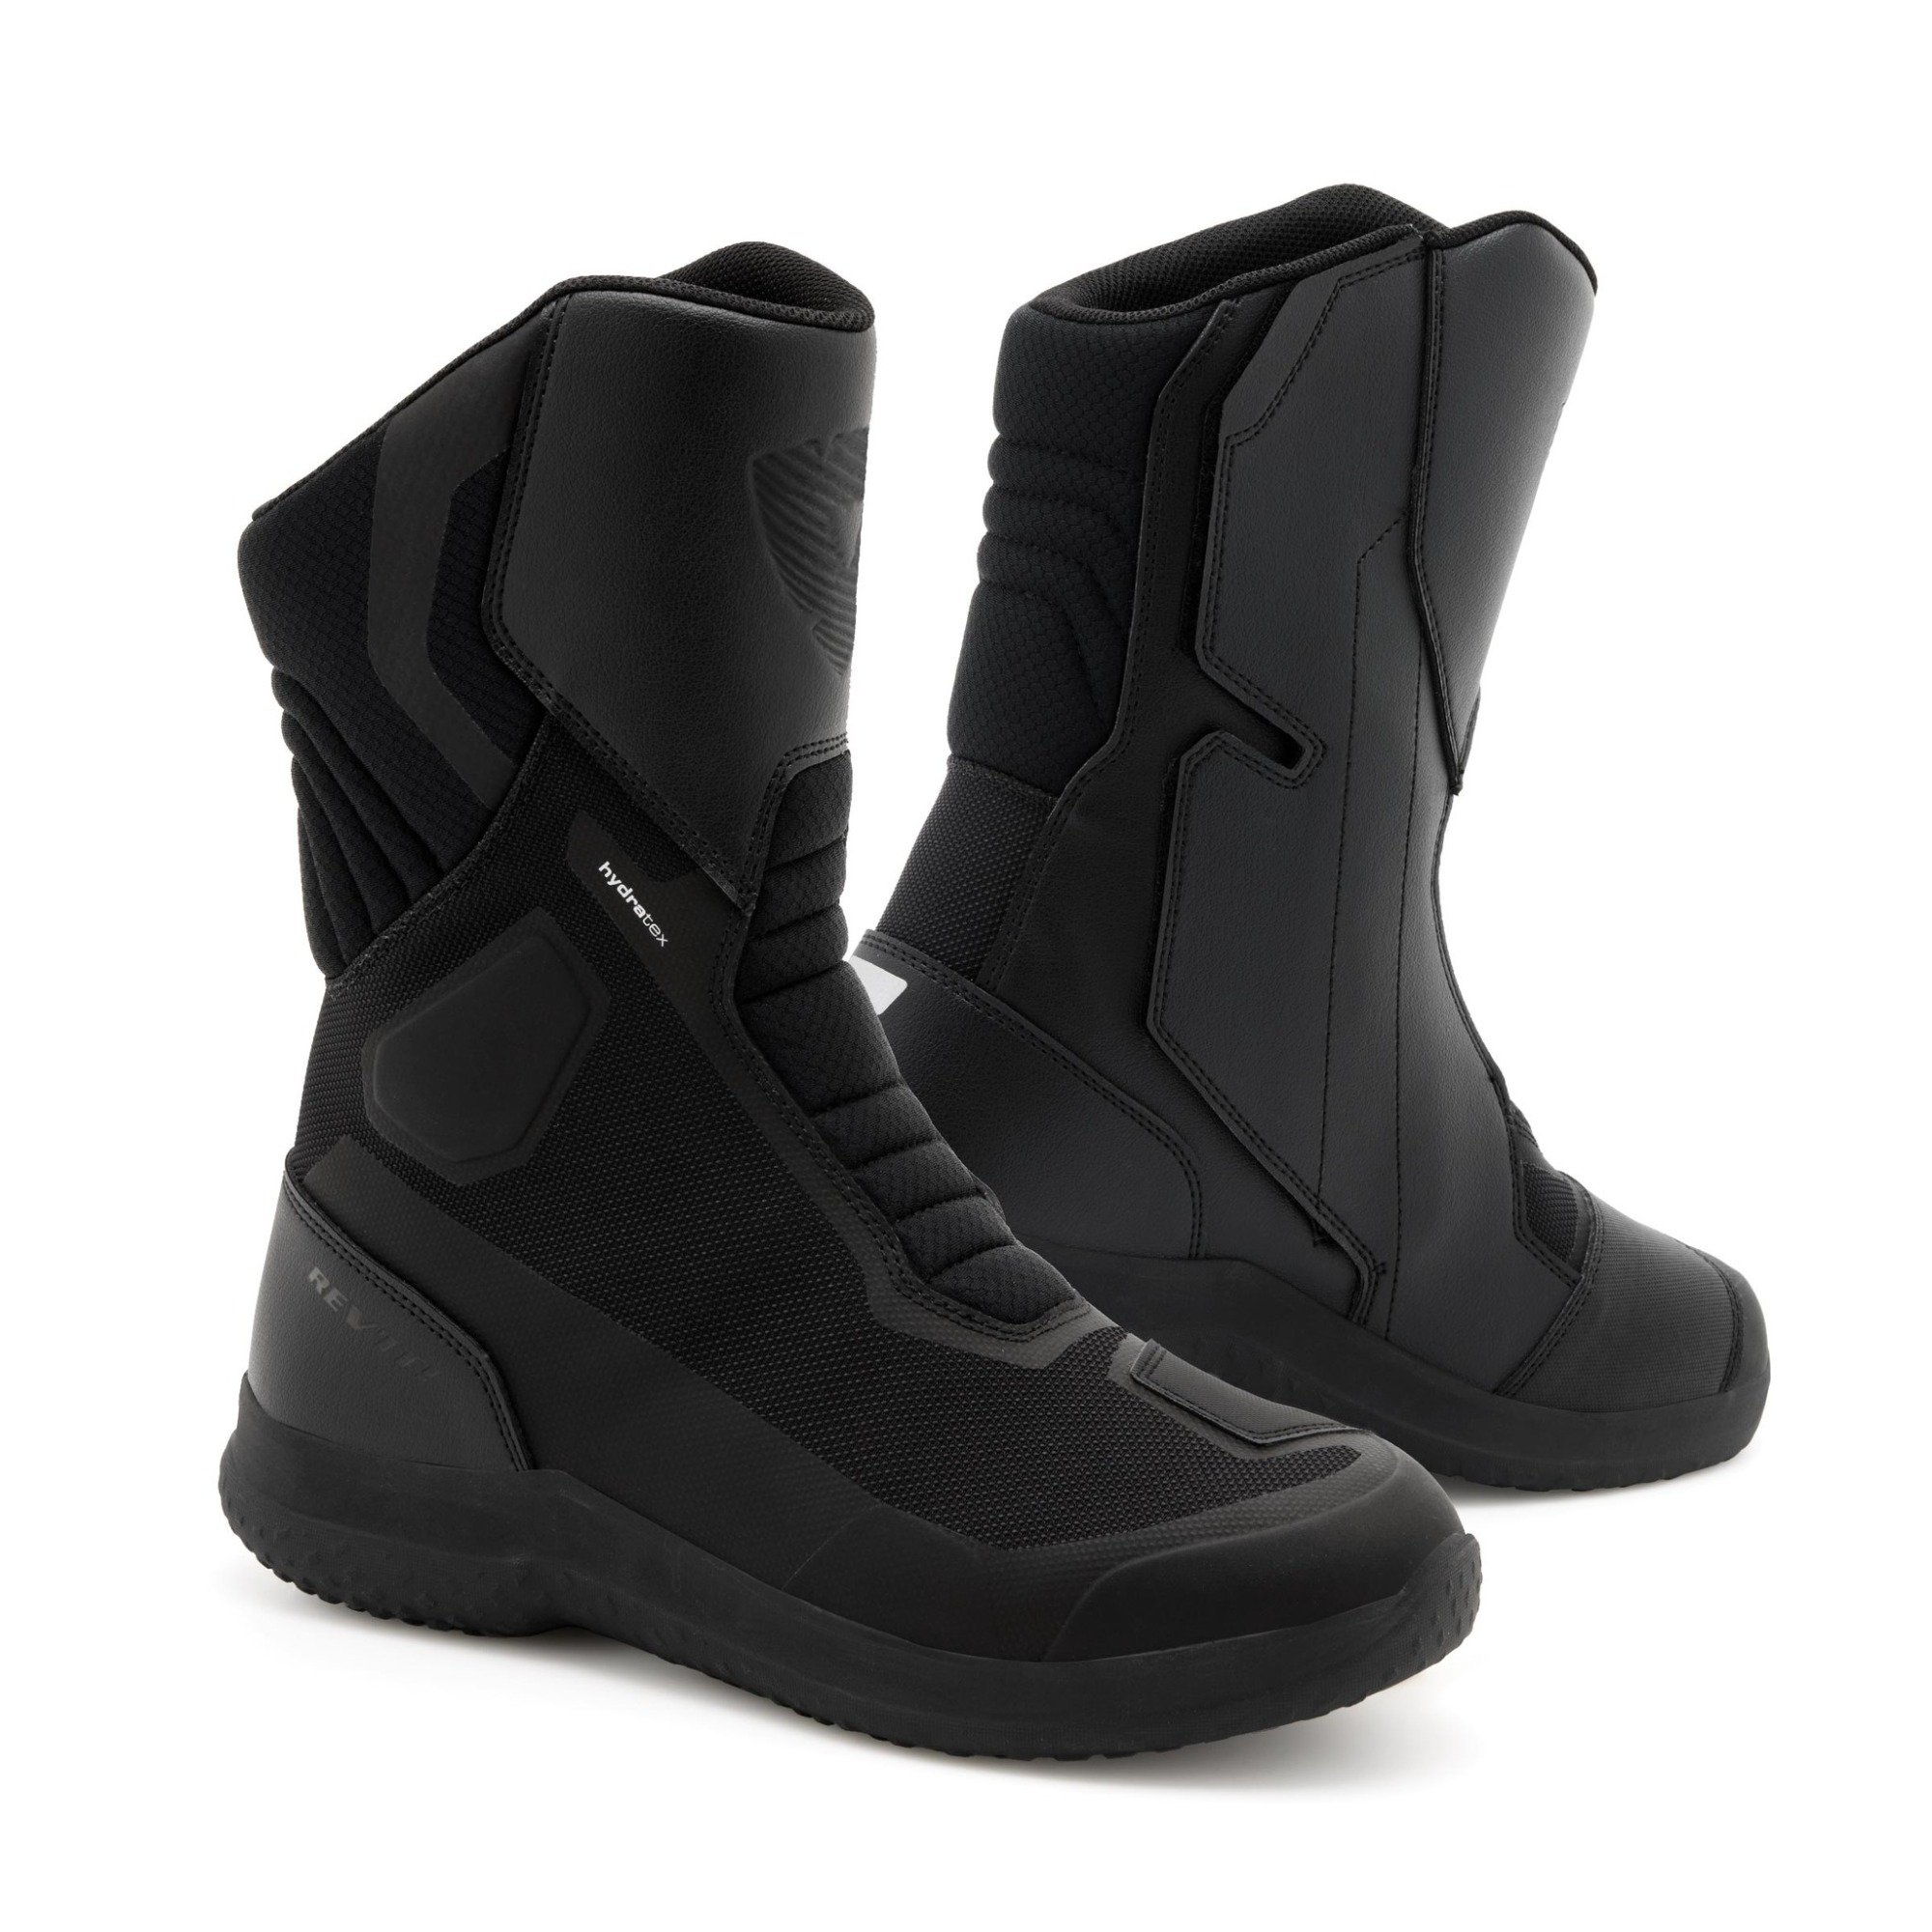 Image of REV'IT! Boots Pulse H2O Black Size 46 ID 8700001330671